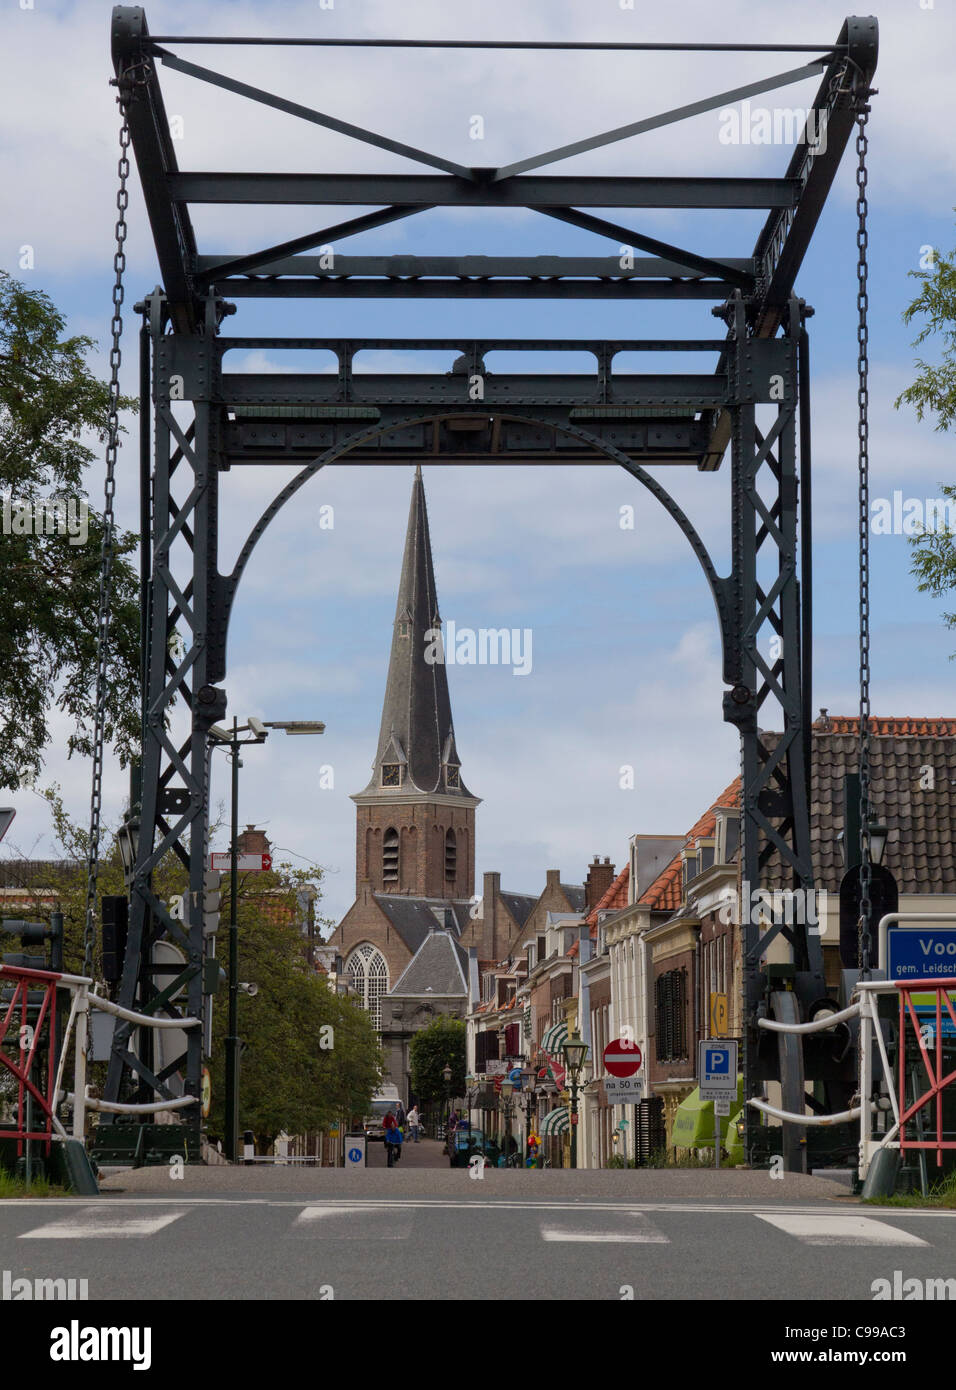 Drawbridge over the canal into the town of Voorburg on the outskirts of Den Haag, The Netherlands Stock Photo